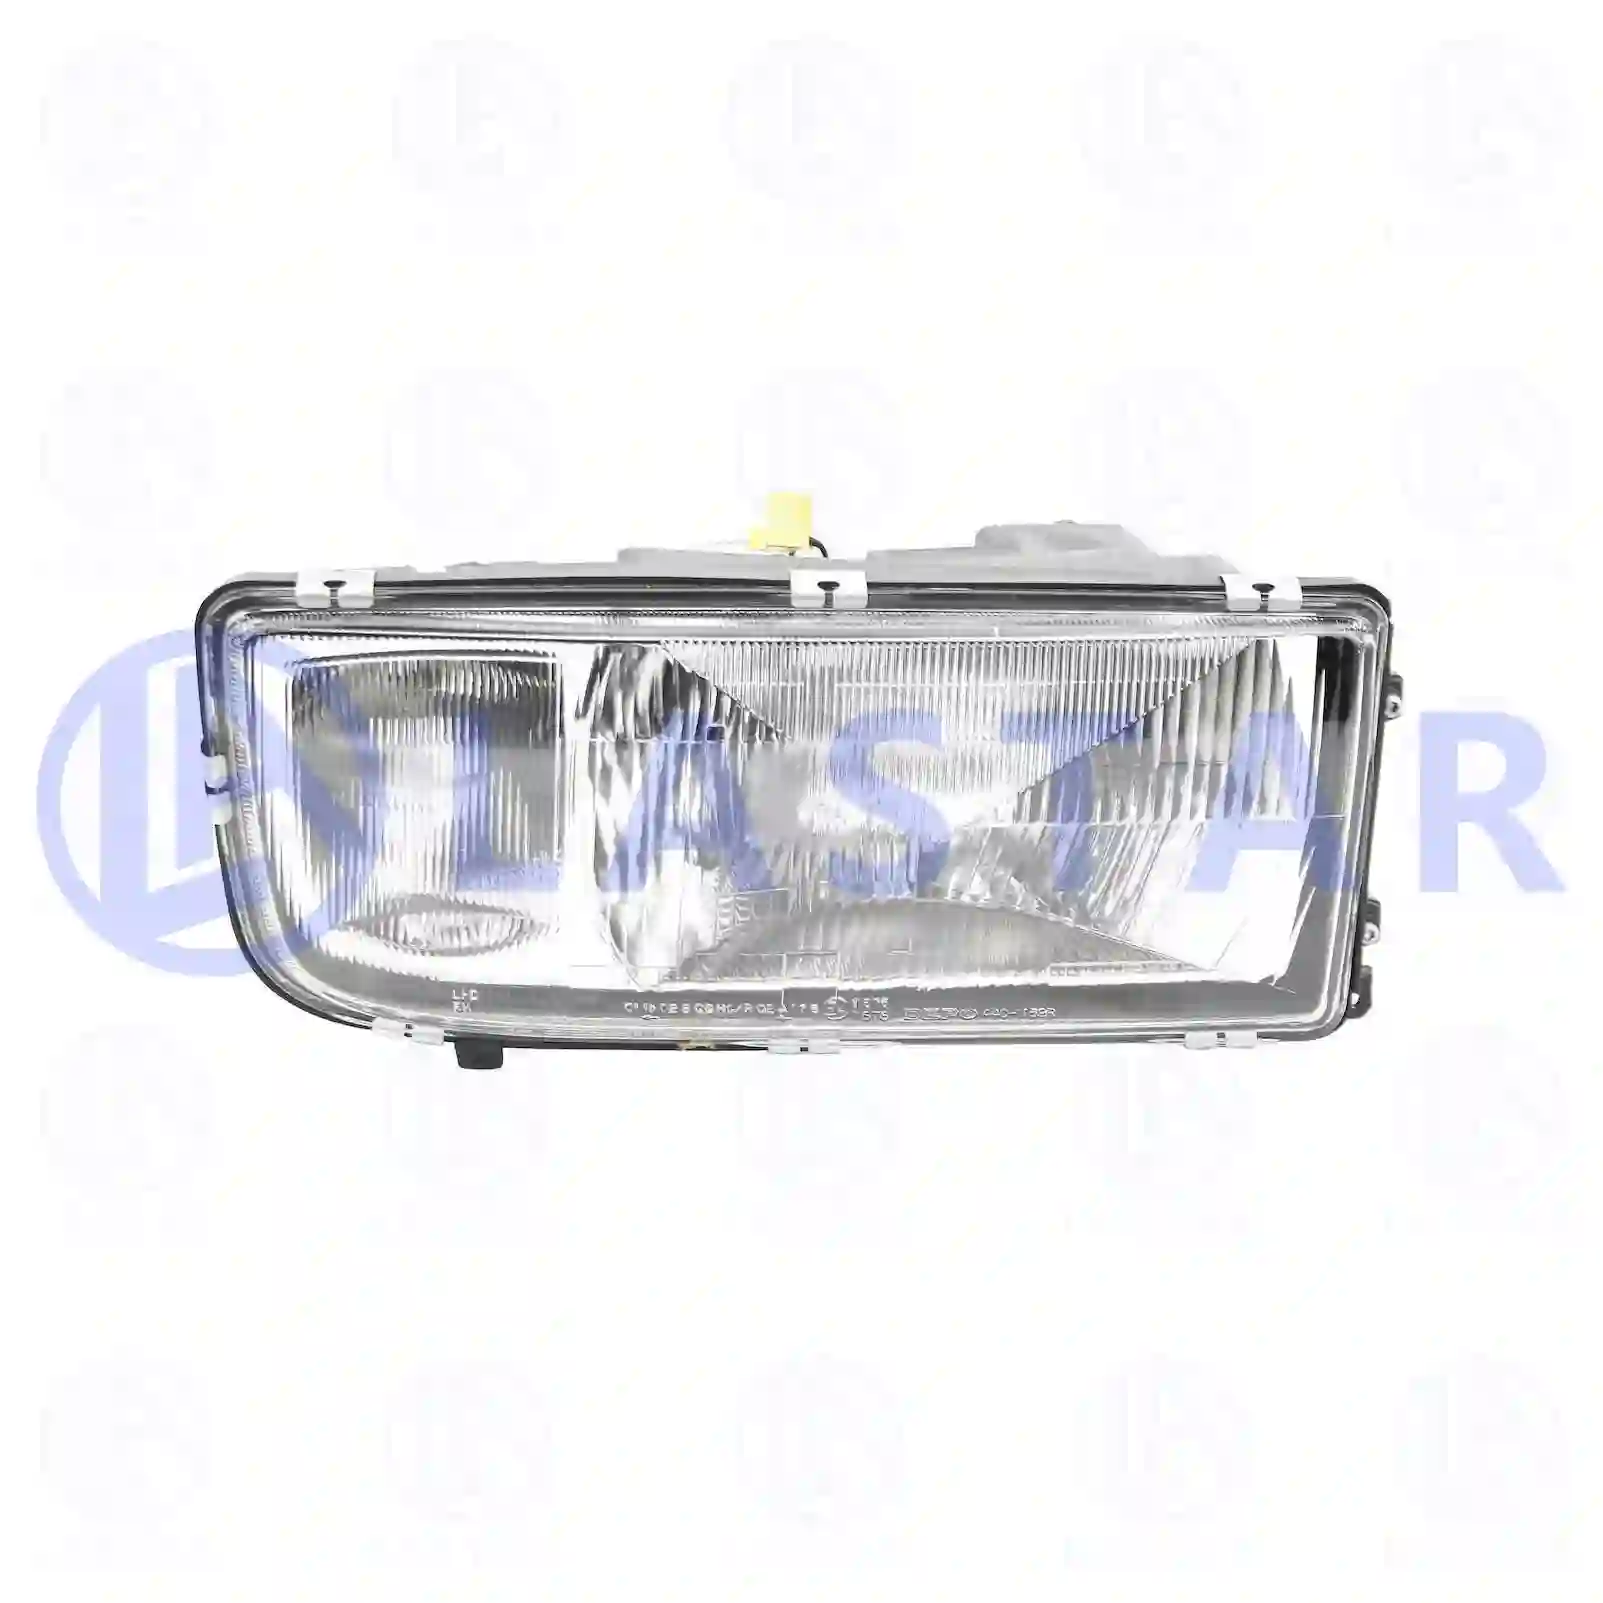 Headlamp, right, without bulbs, 77710811, 9418204461, 94182 ||  77710811 Lastar Spare Part | Truck Spare Parts, Auotomotive Spare Parts Headlamp, right, without bulbs, 77710811, 9418204461, 94182 ||  77710811 Lastar Spare Part | Truck Spare Parts, Auotomotive Spare Parts